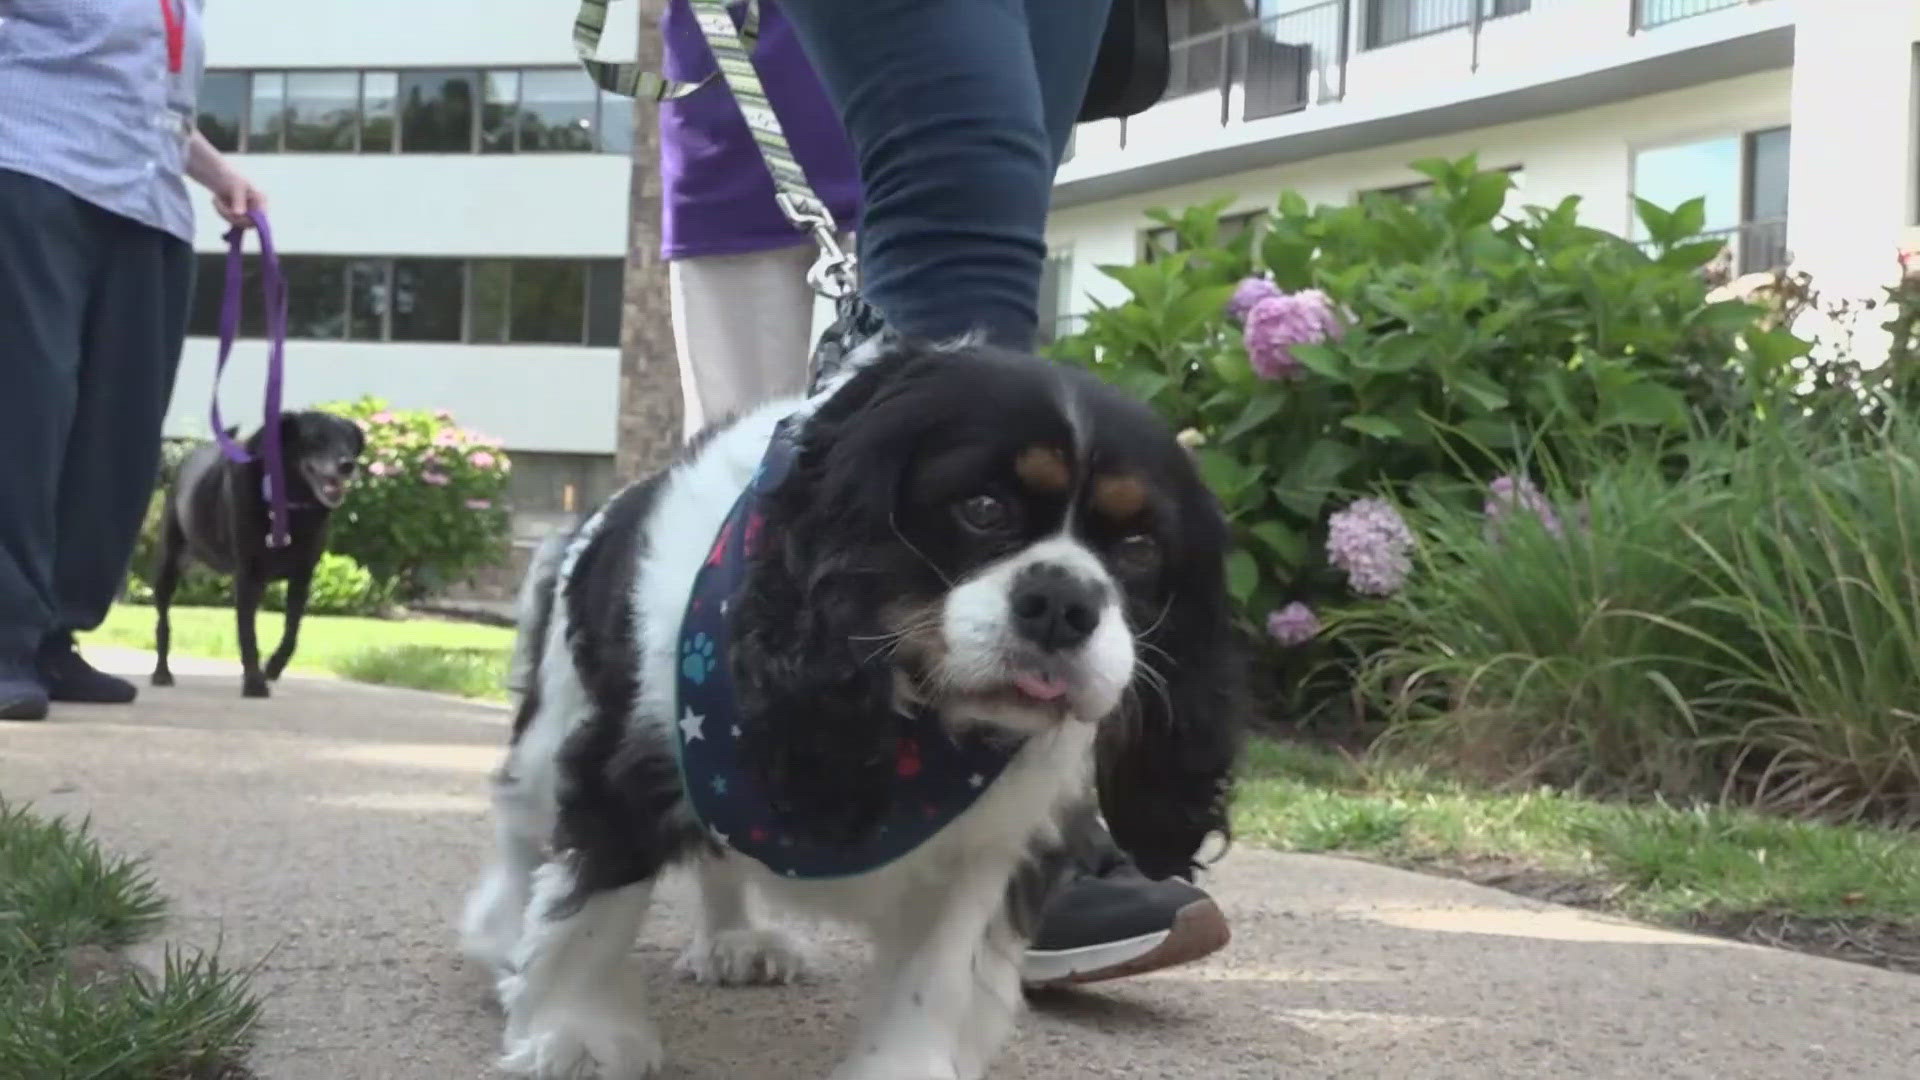 A senior living community in Fairfax just launched a brand new program using therapy dogs.